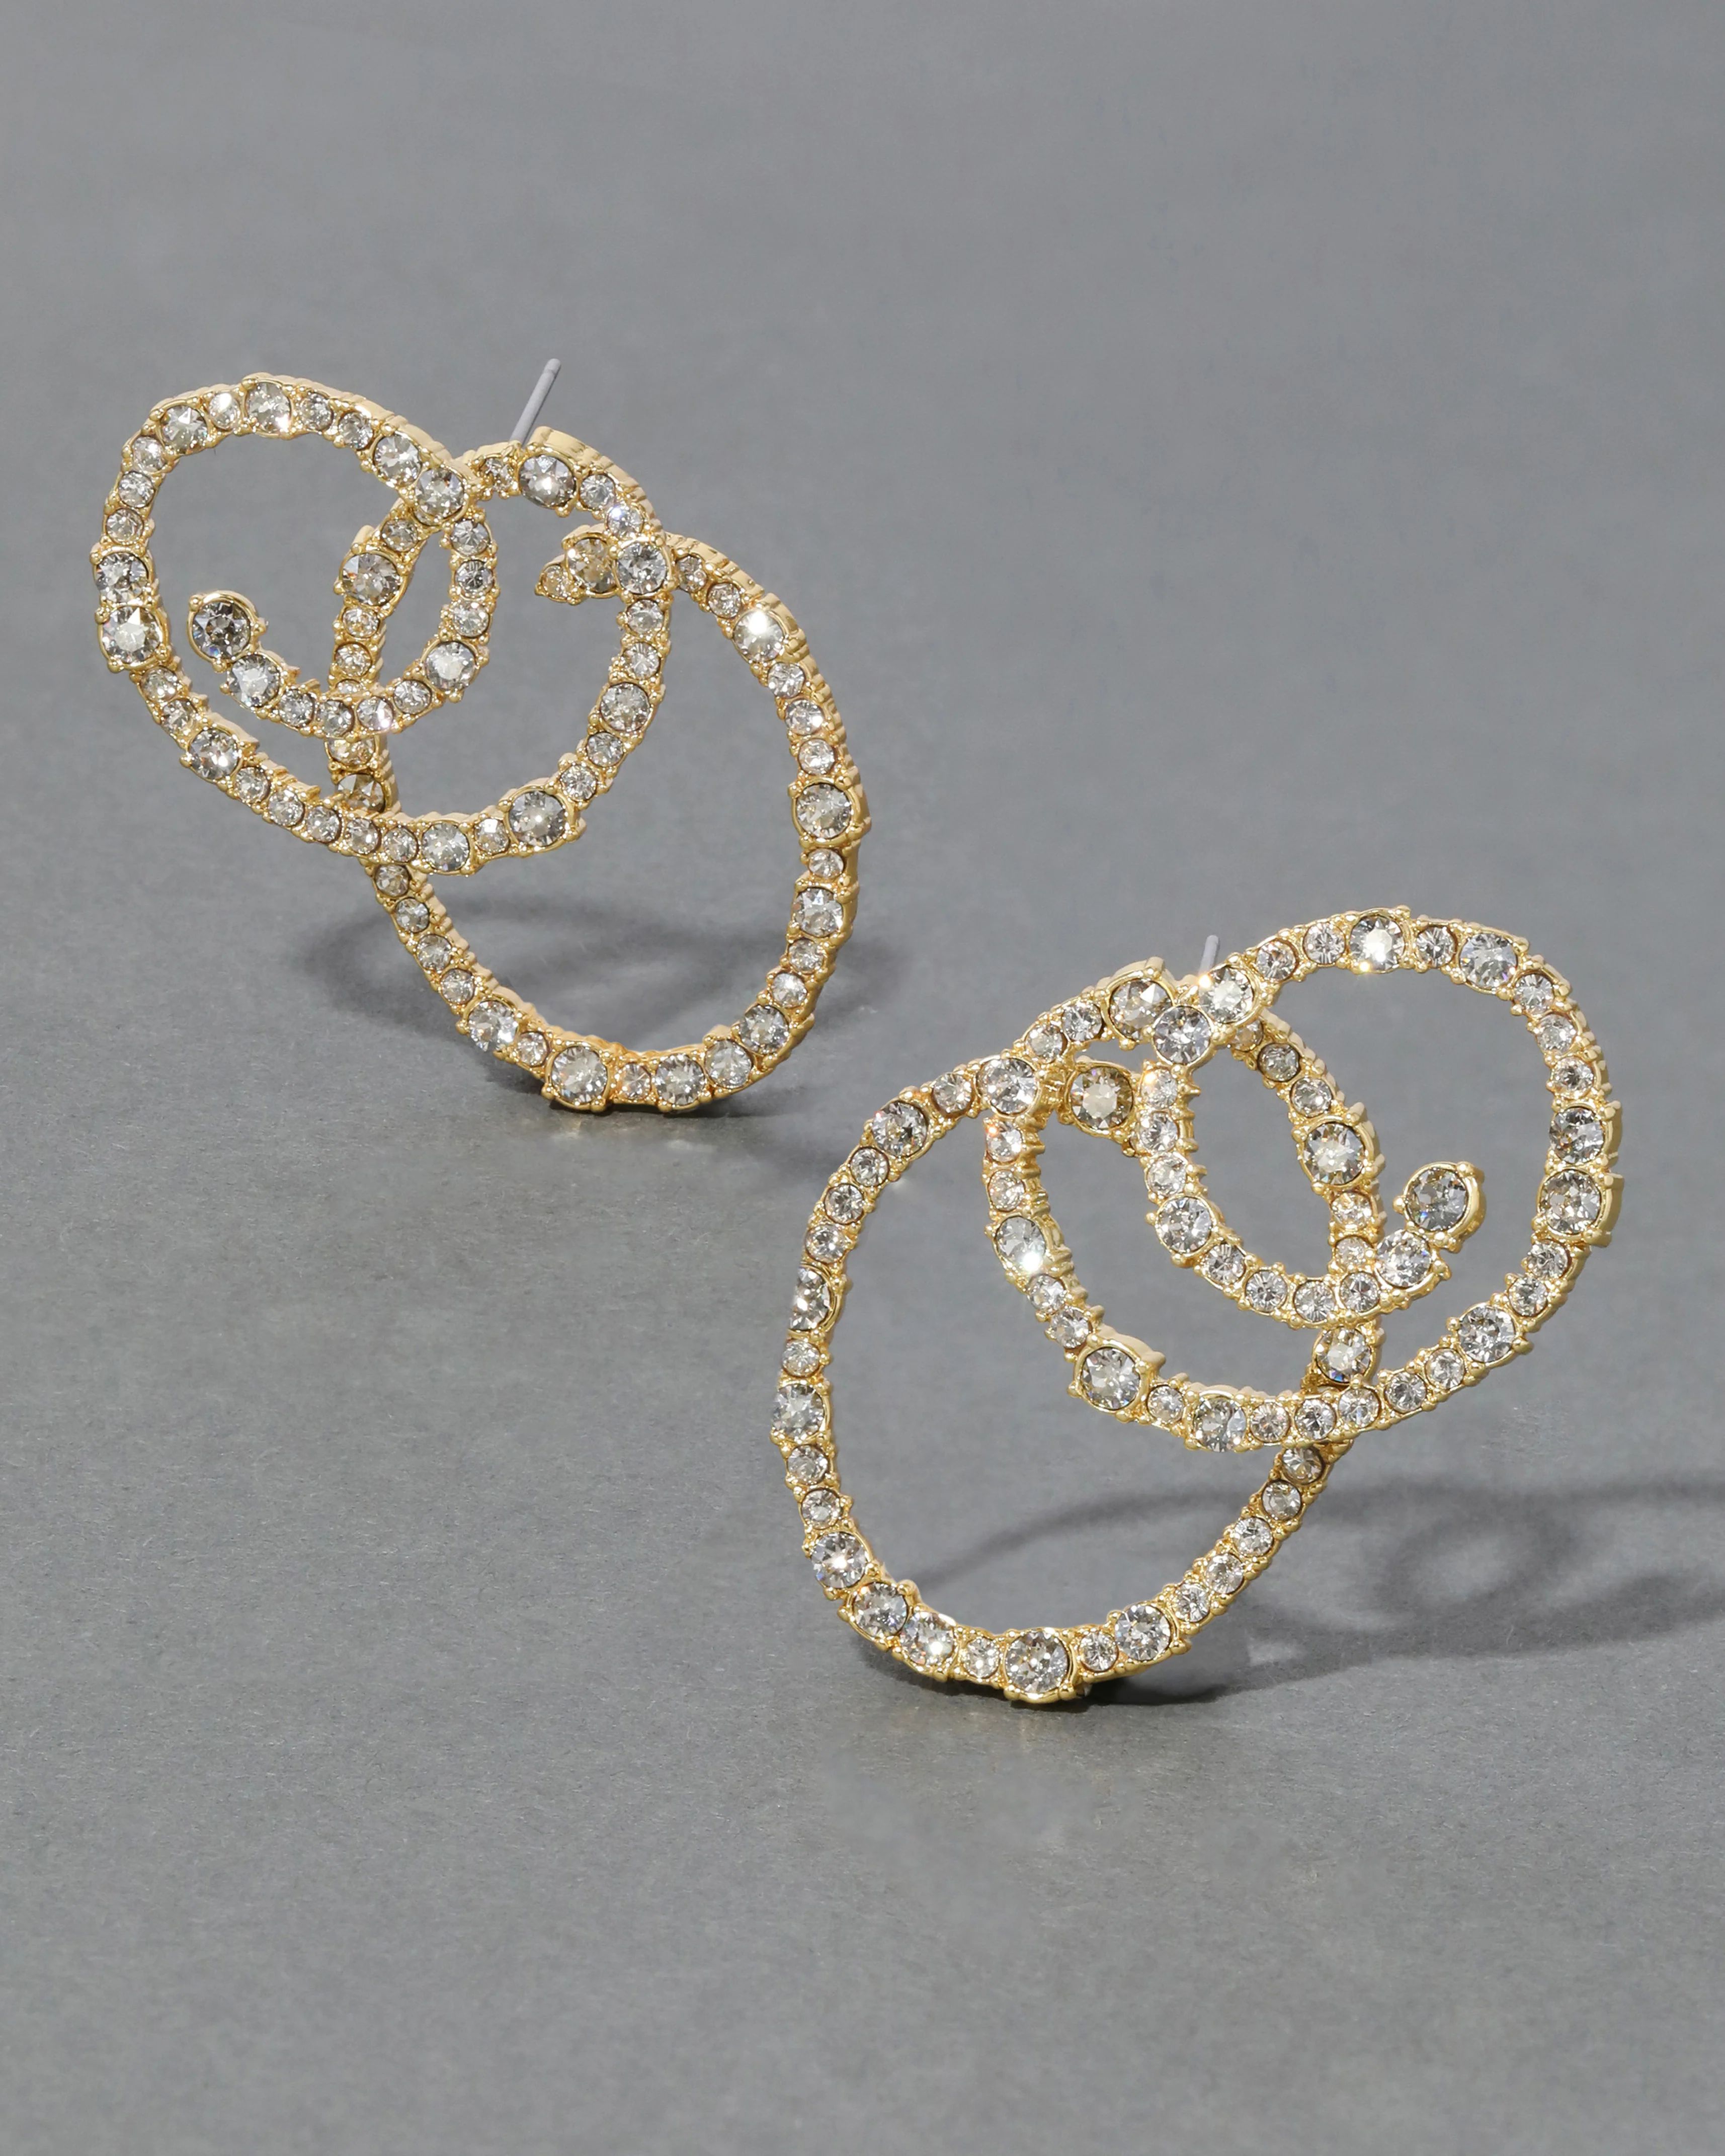 Gold Punk Royale Large Looped Earring | ALEXIS BITTAR | Alexis Bittar